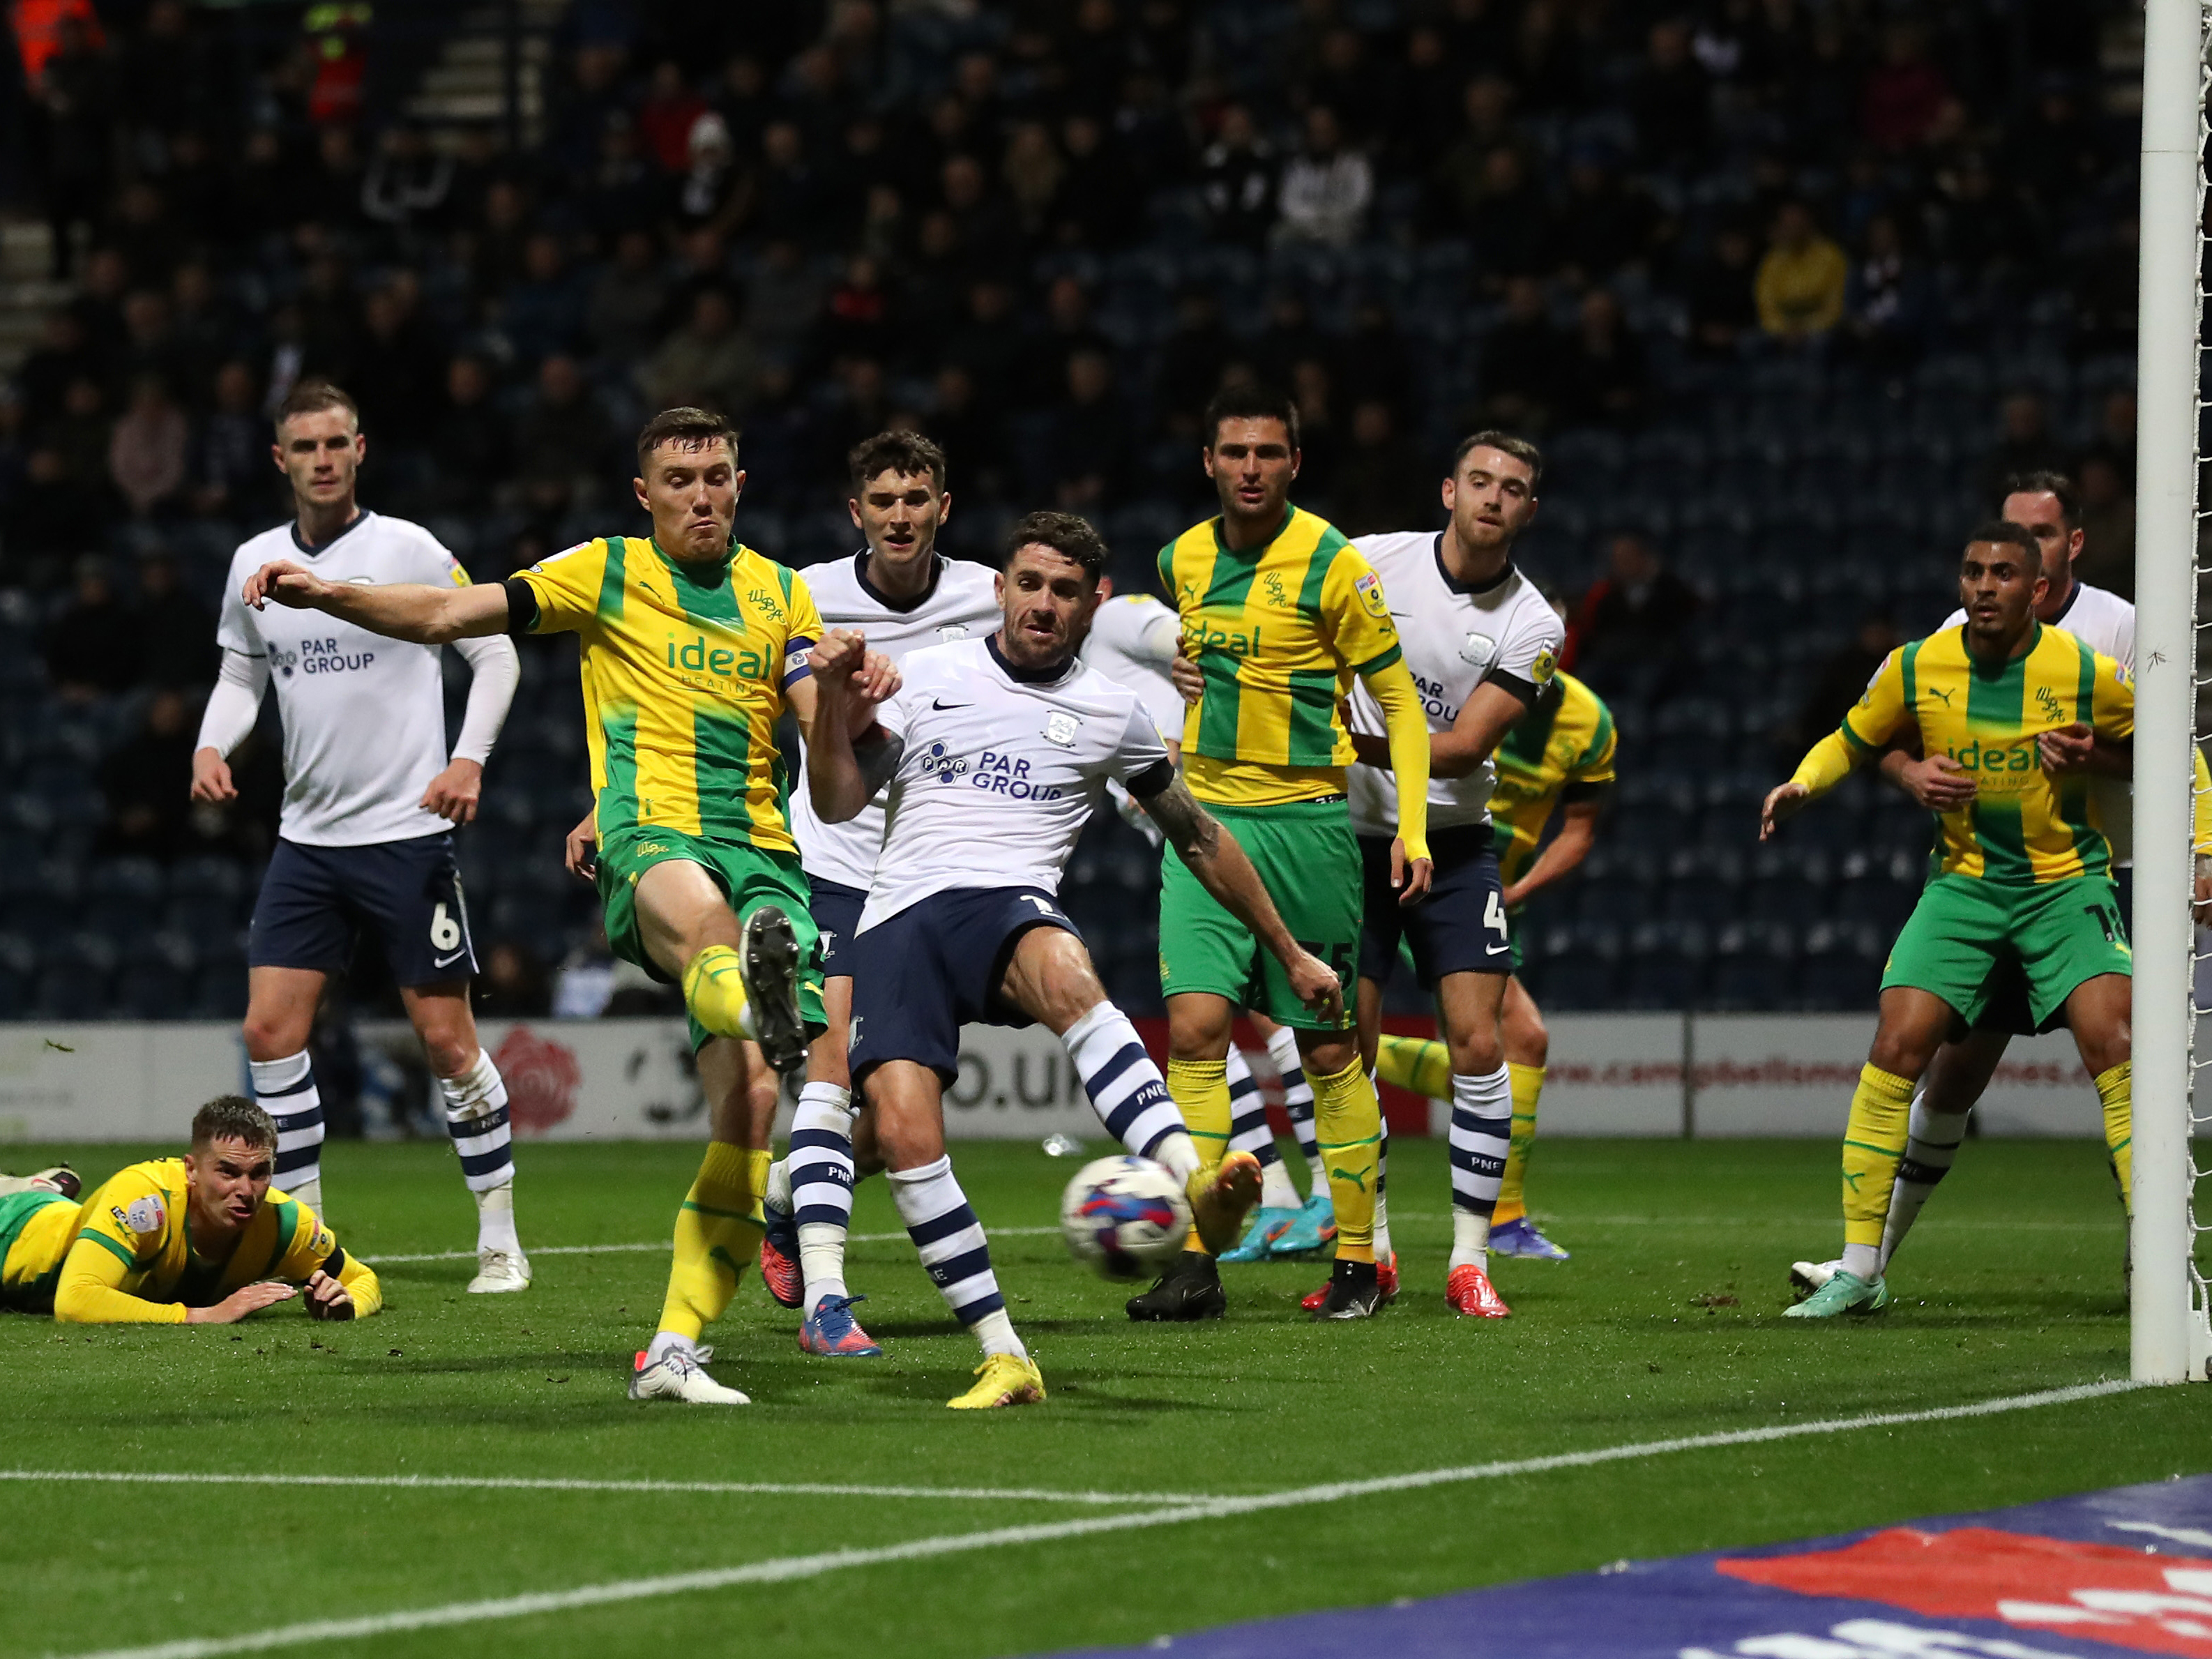 An image of Dara O'Shea battling to win the ball against Preston North End